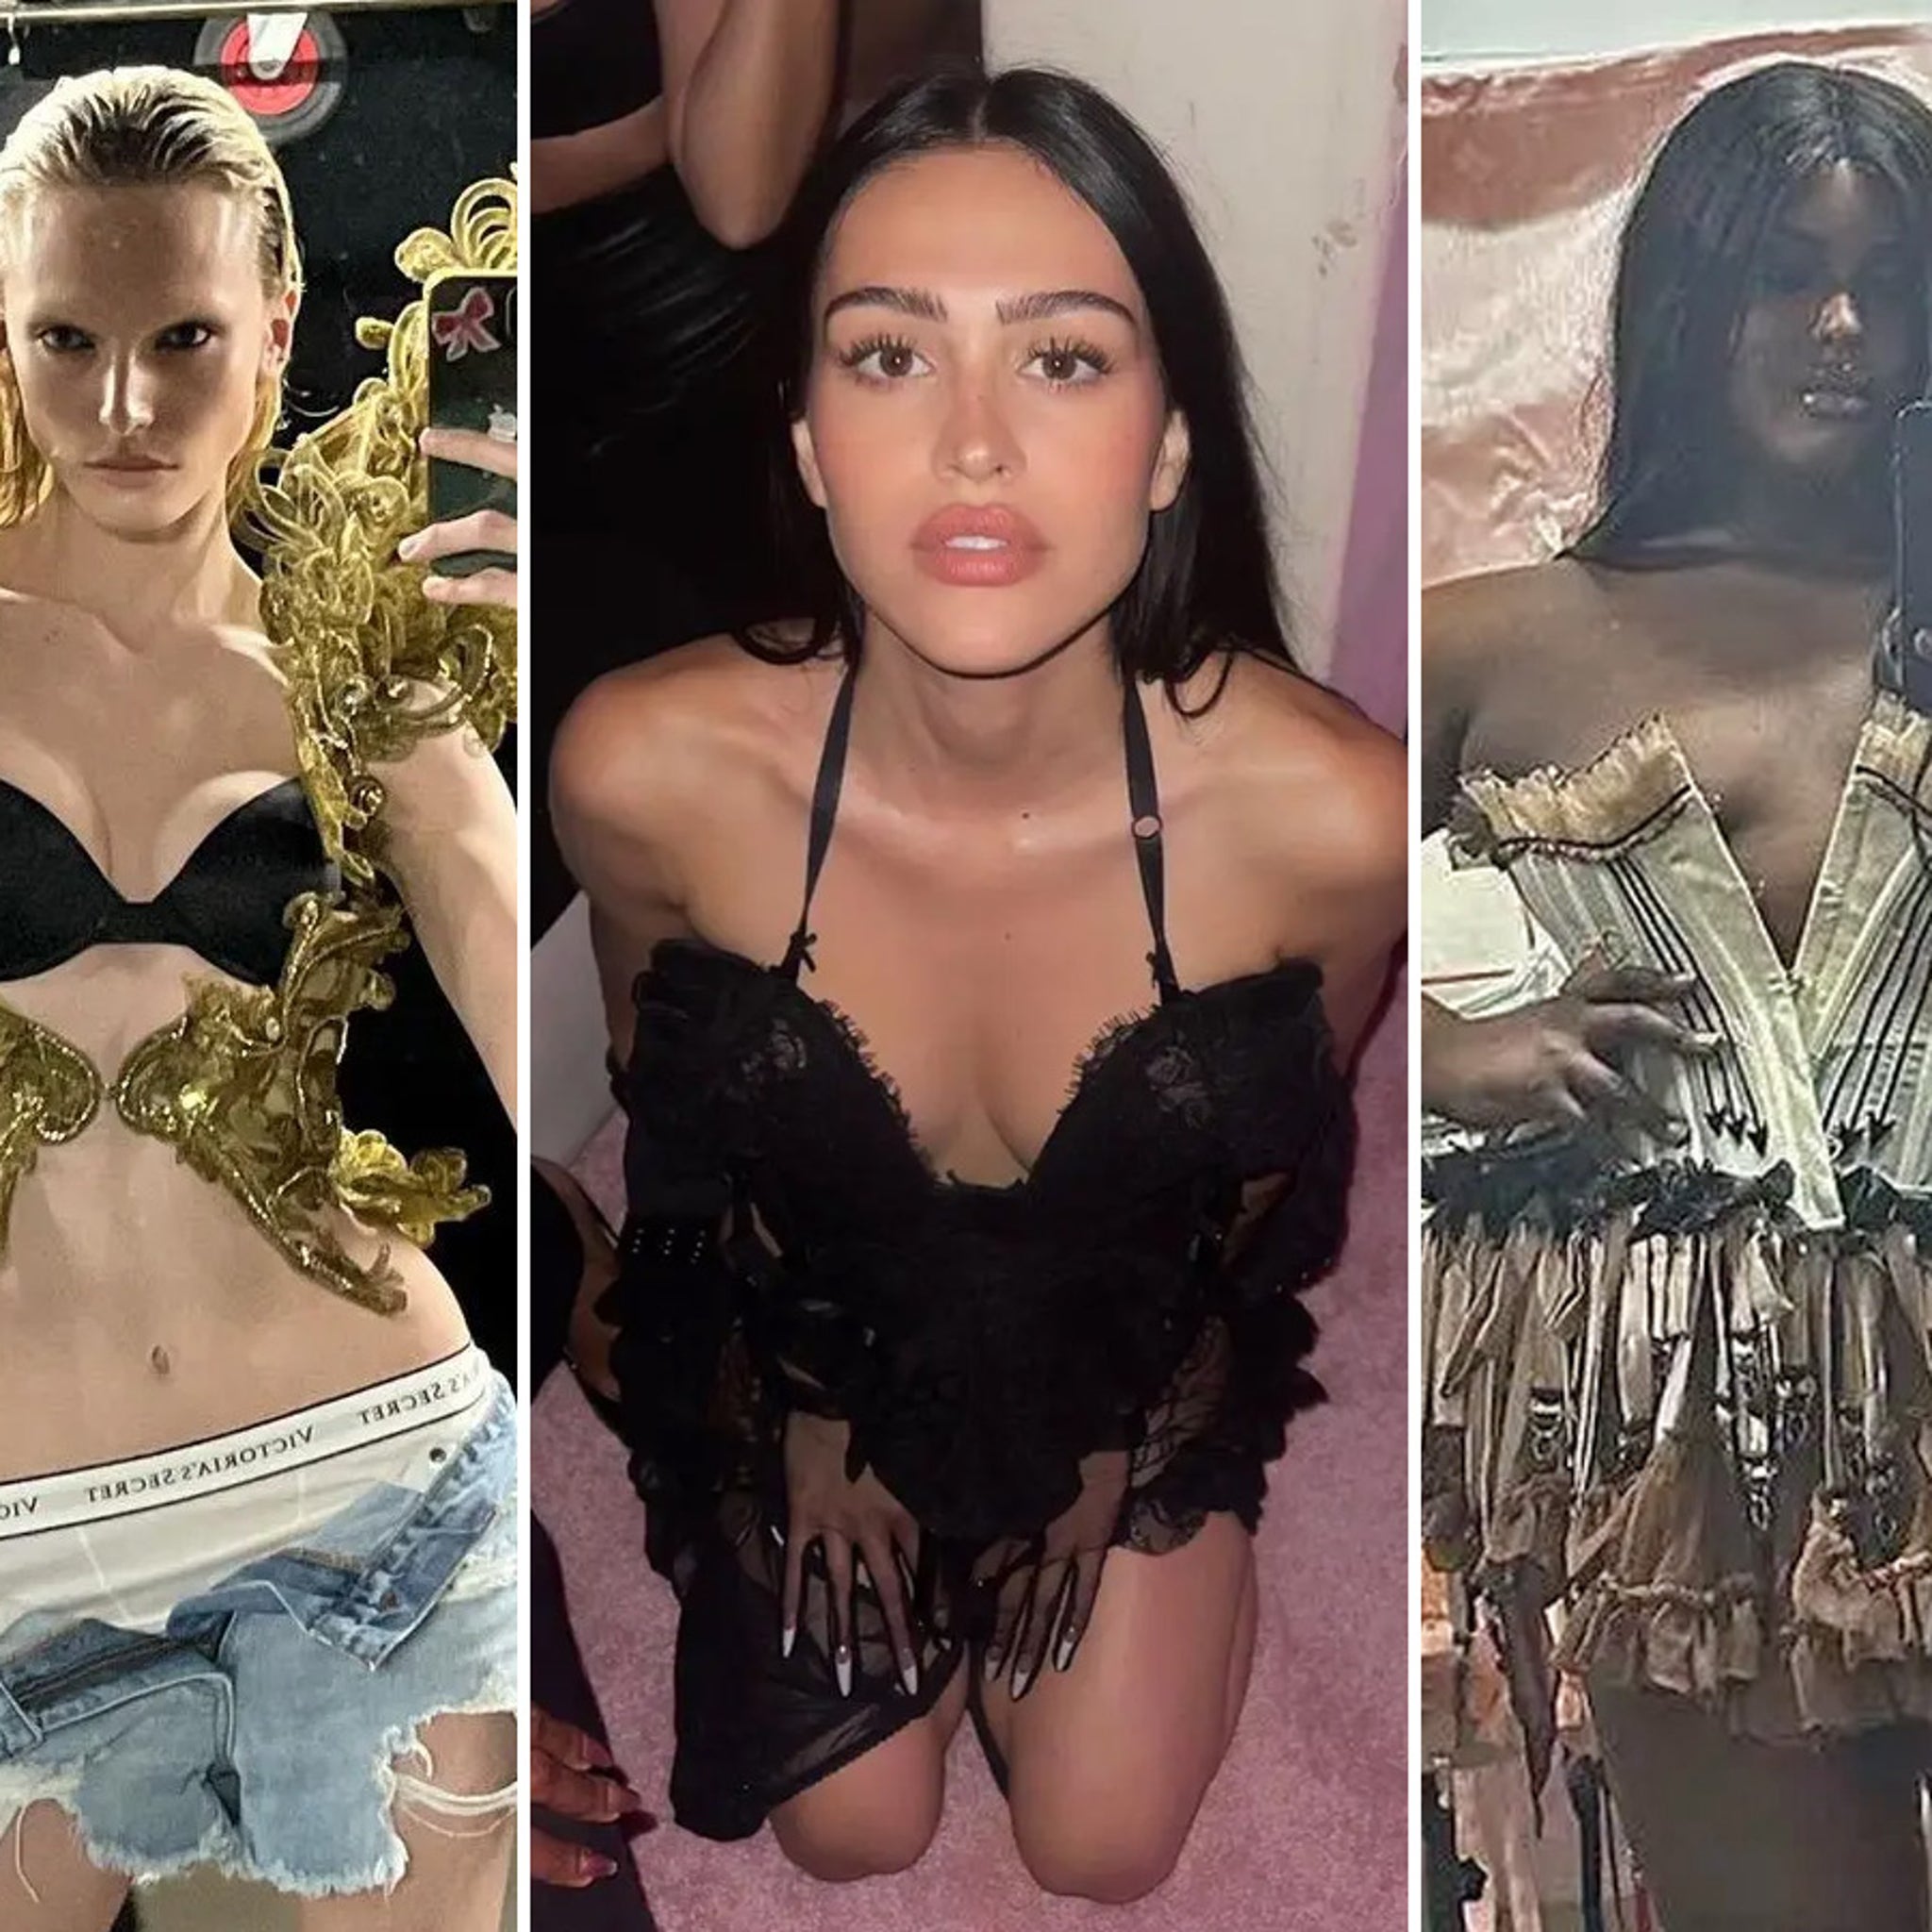 Why Victoria's Secret still refuses to include plus-size women in its shows